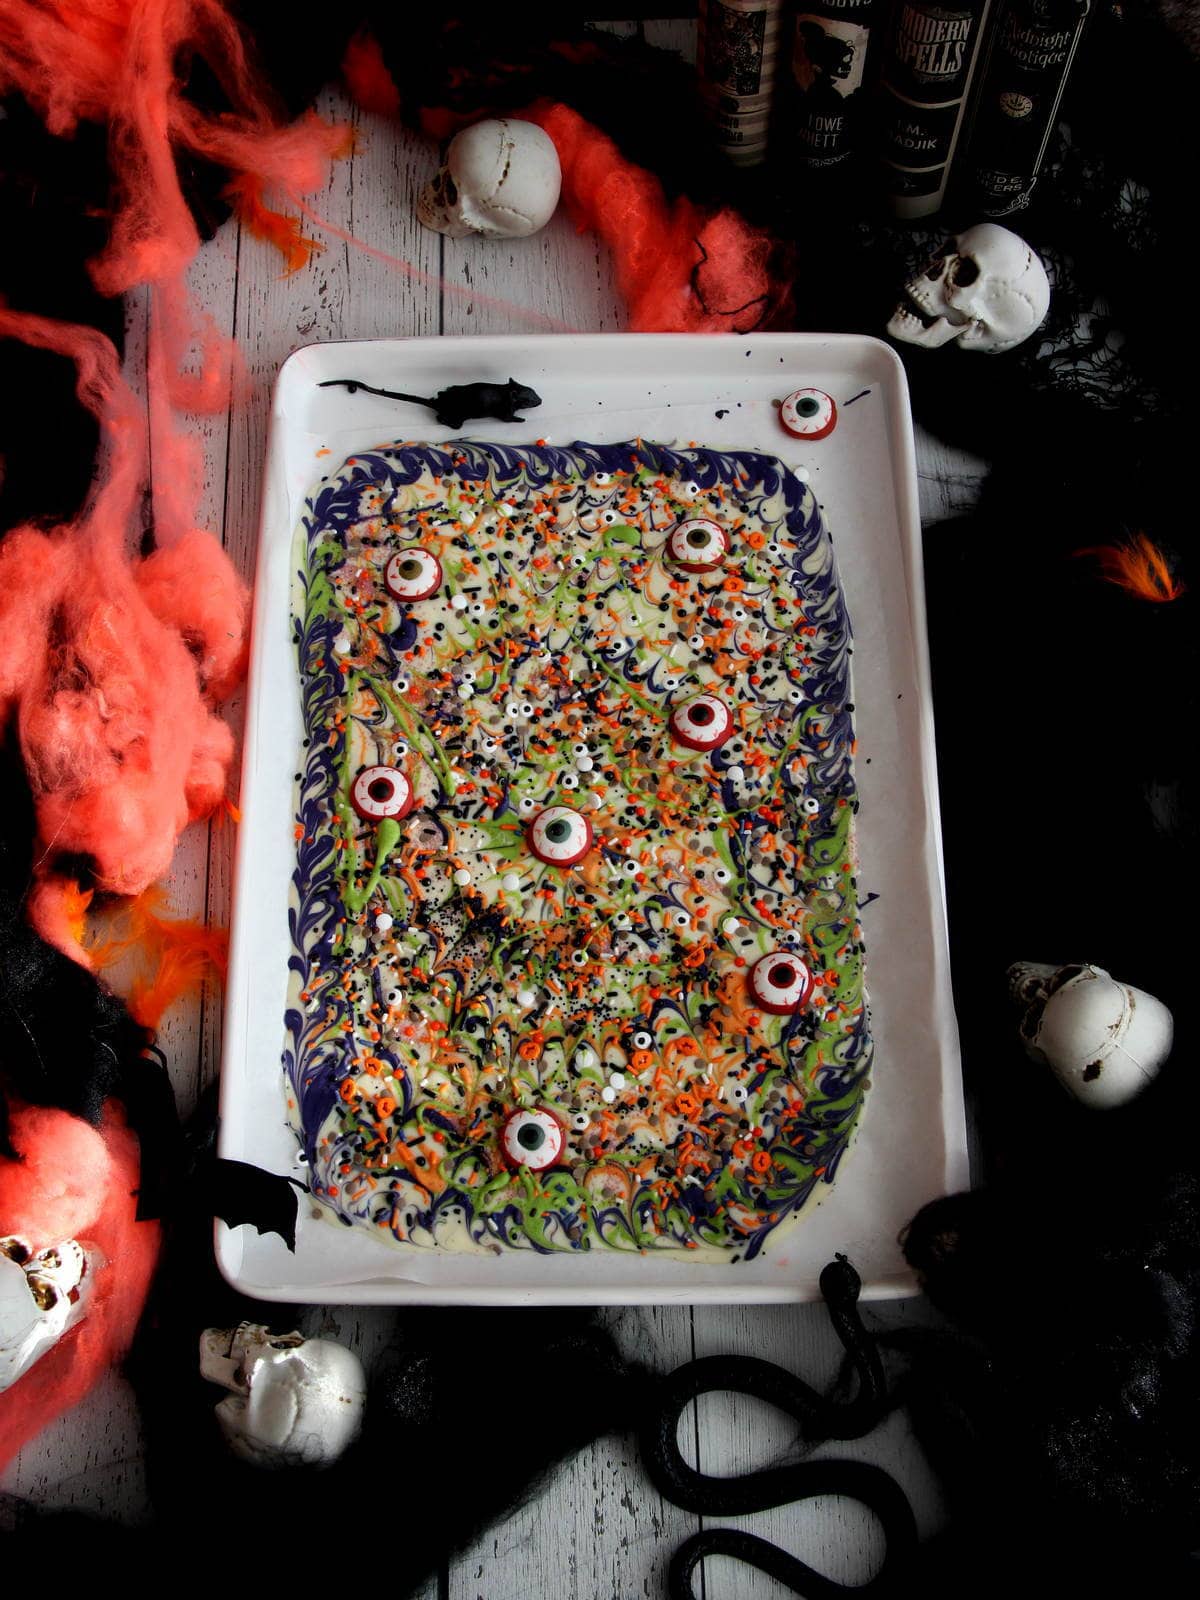 Halloween bark made from white chocolate placed on white baking sheet